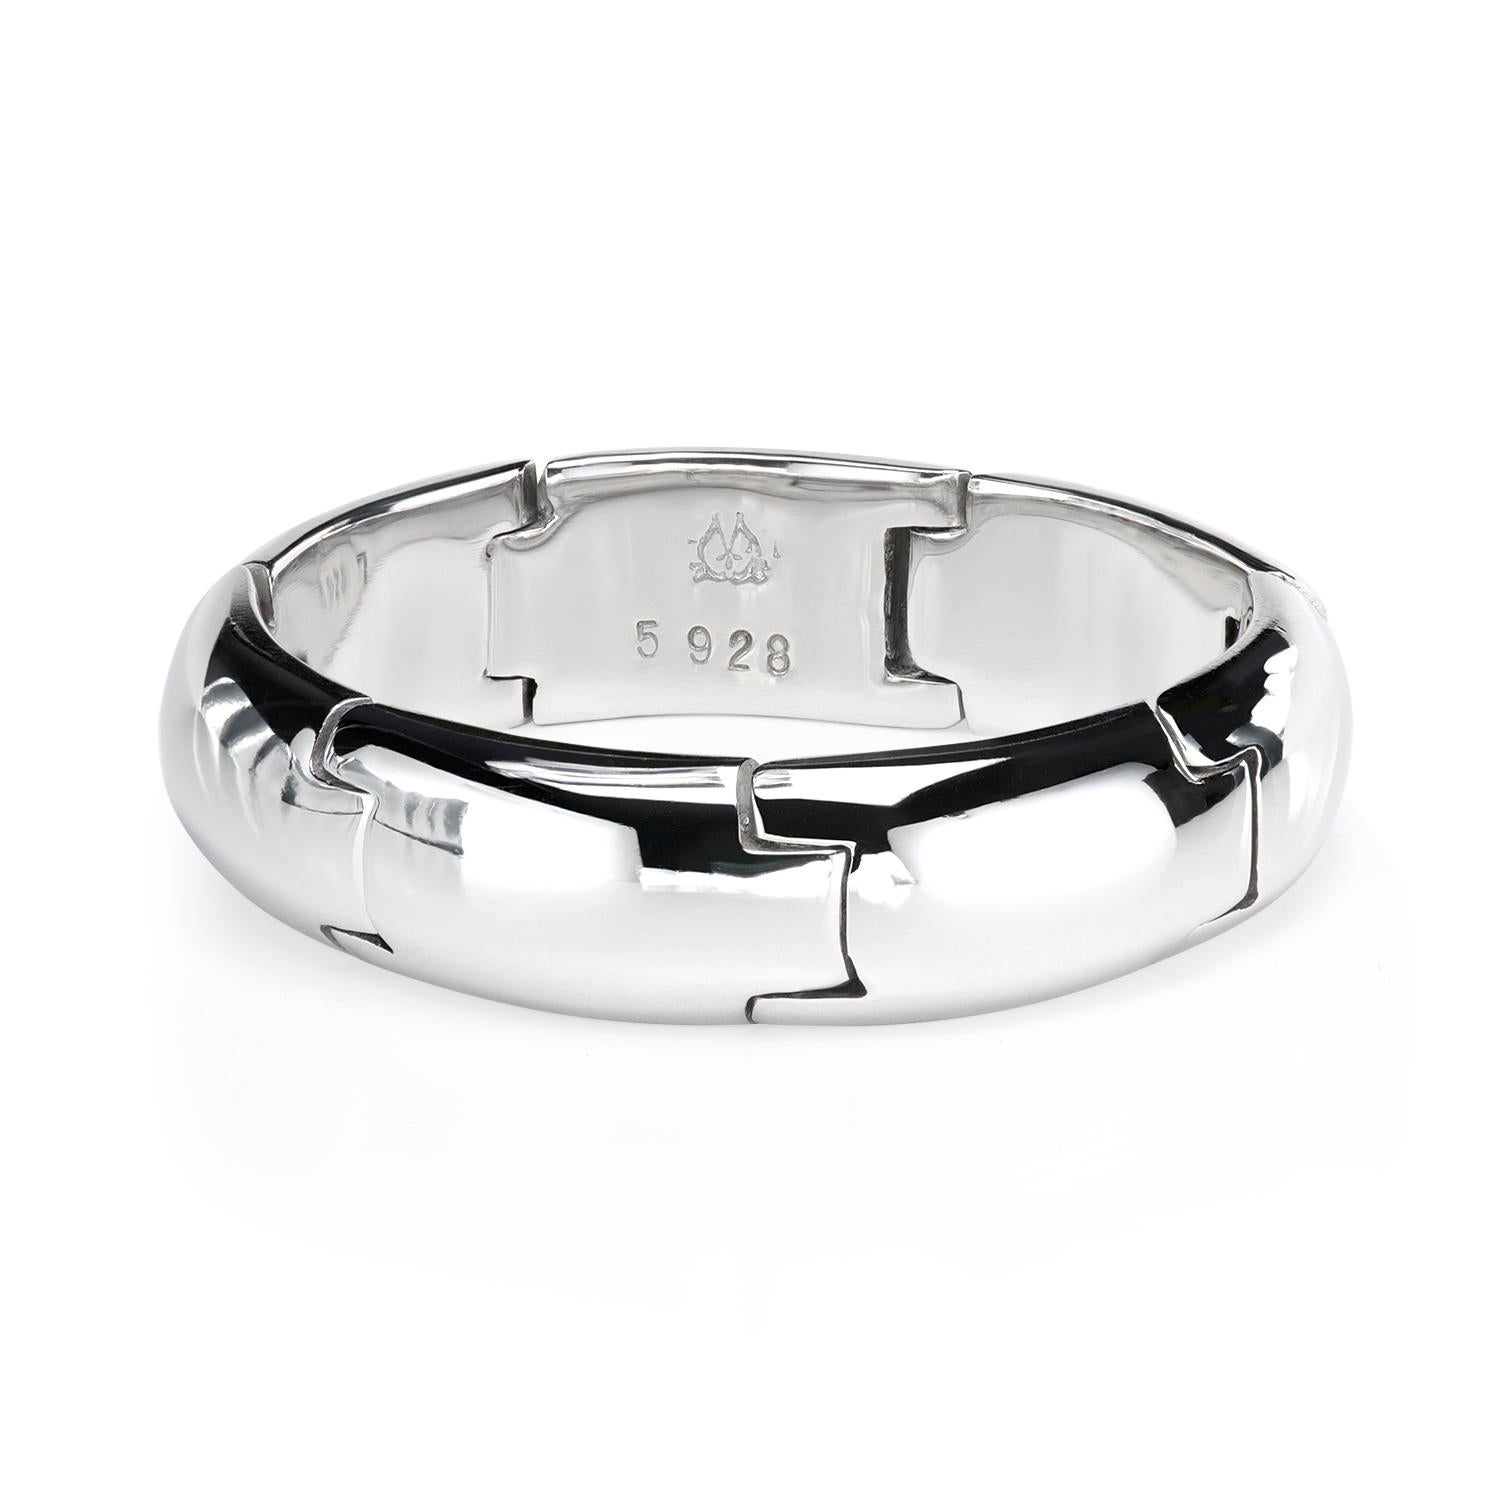 The articulated wedding band is designed to keep fingers in a feather-like soft comfort thanks to the hinged joints, relieving pressure points under duress. 

Wedding Band Guide
5.8 mm width
Finger size: 9 1/2
Rolex-grade platinum
Smooth chamfered